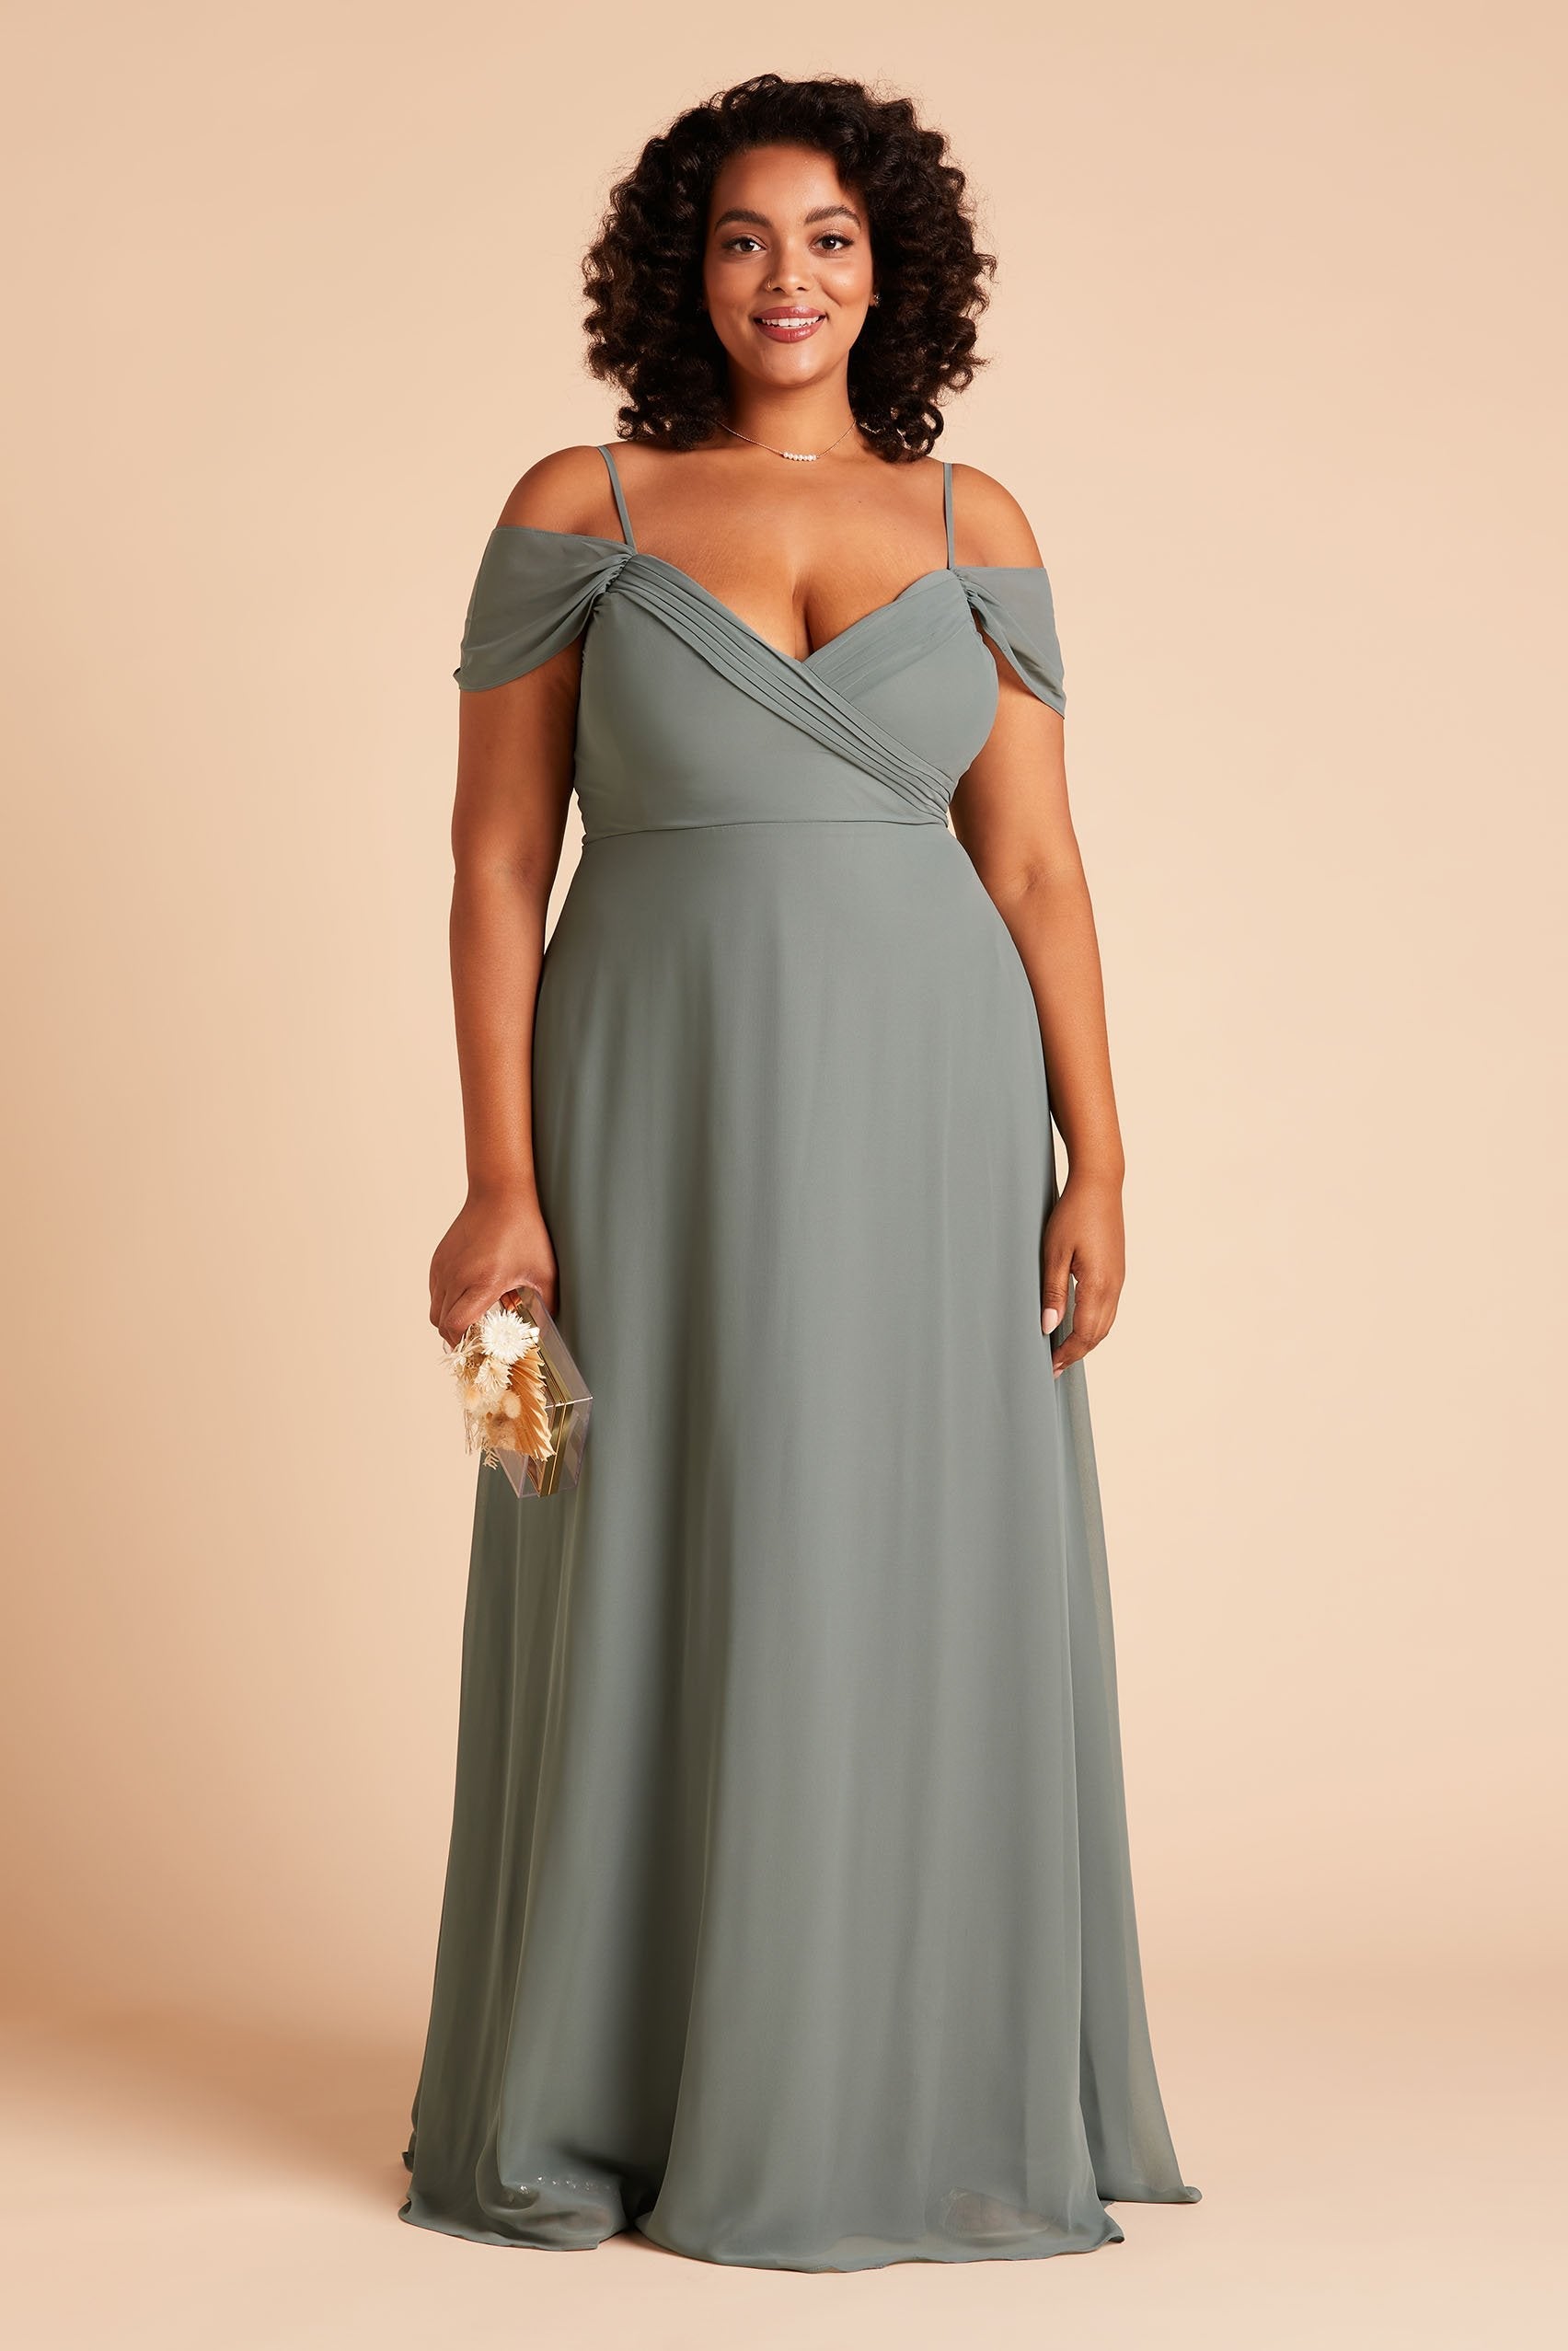 Spence convertible plus size bridesmaid dress in sea glass green chiffon by Birdy Grey, front view